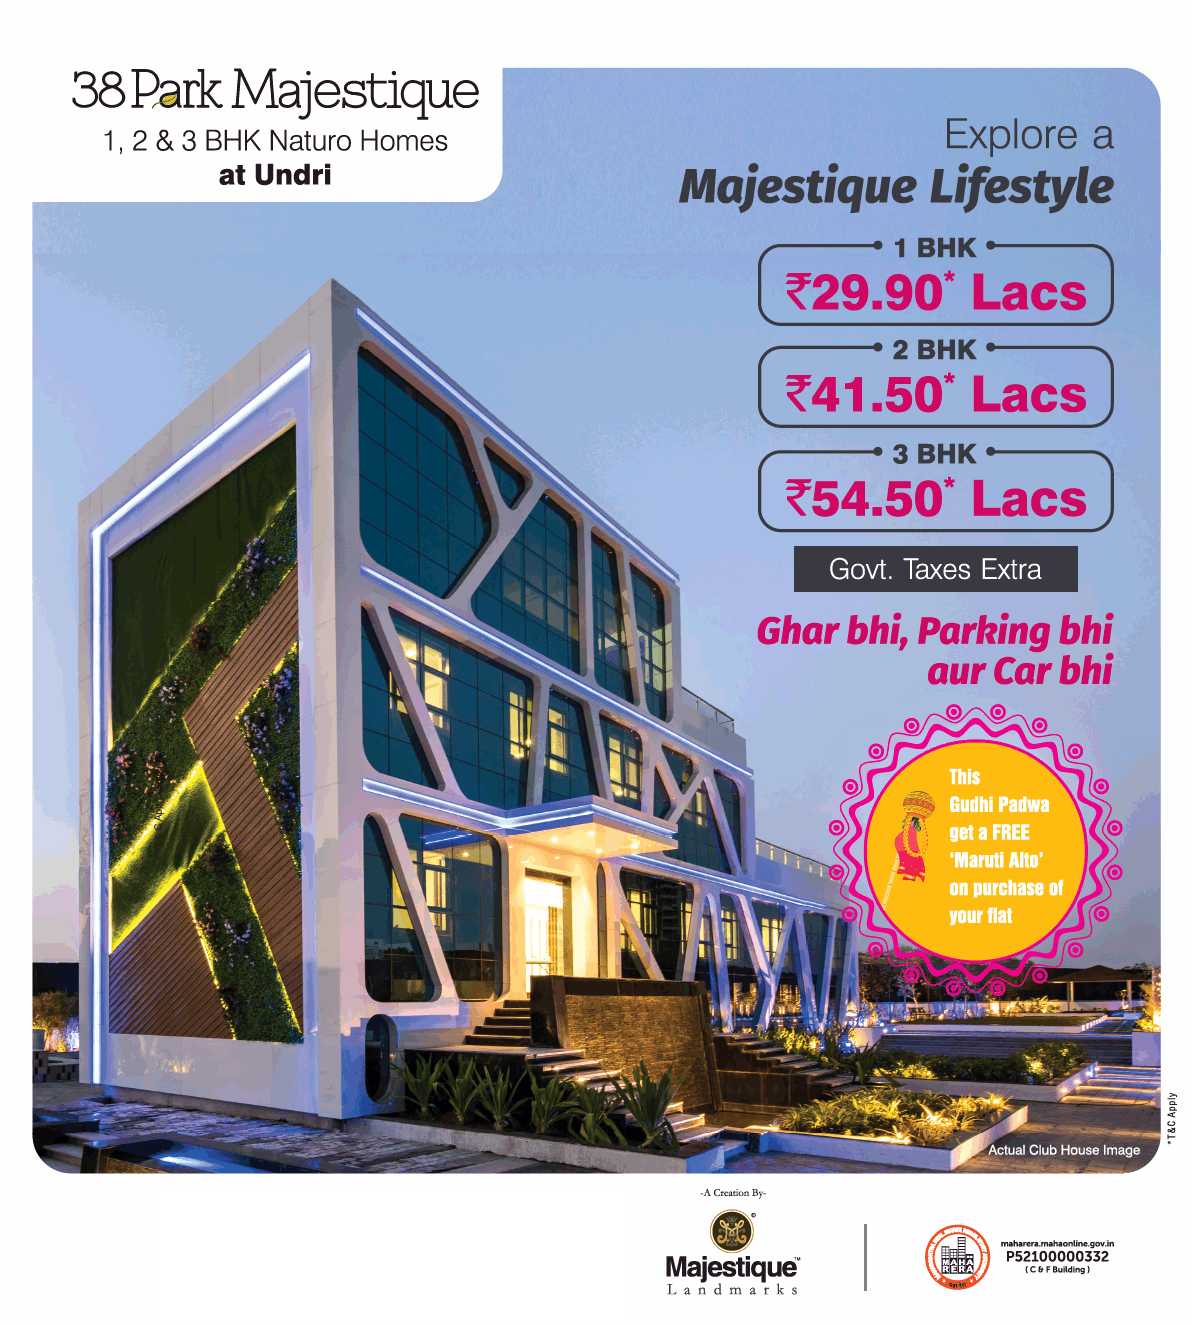 Explore a majestique lifestyle by residing at 38 Park Majestique in Pune Update